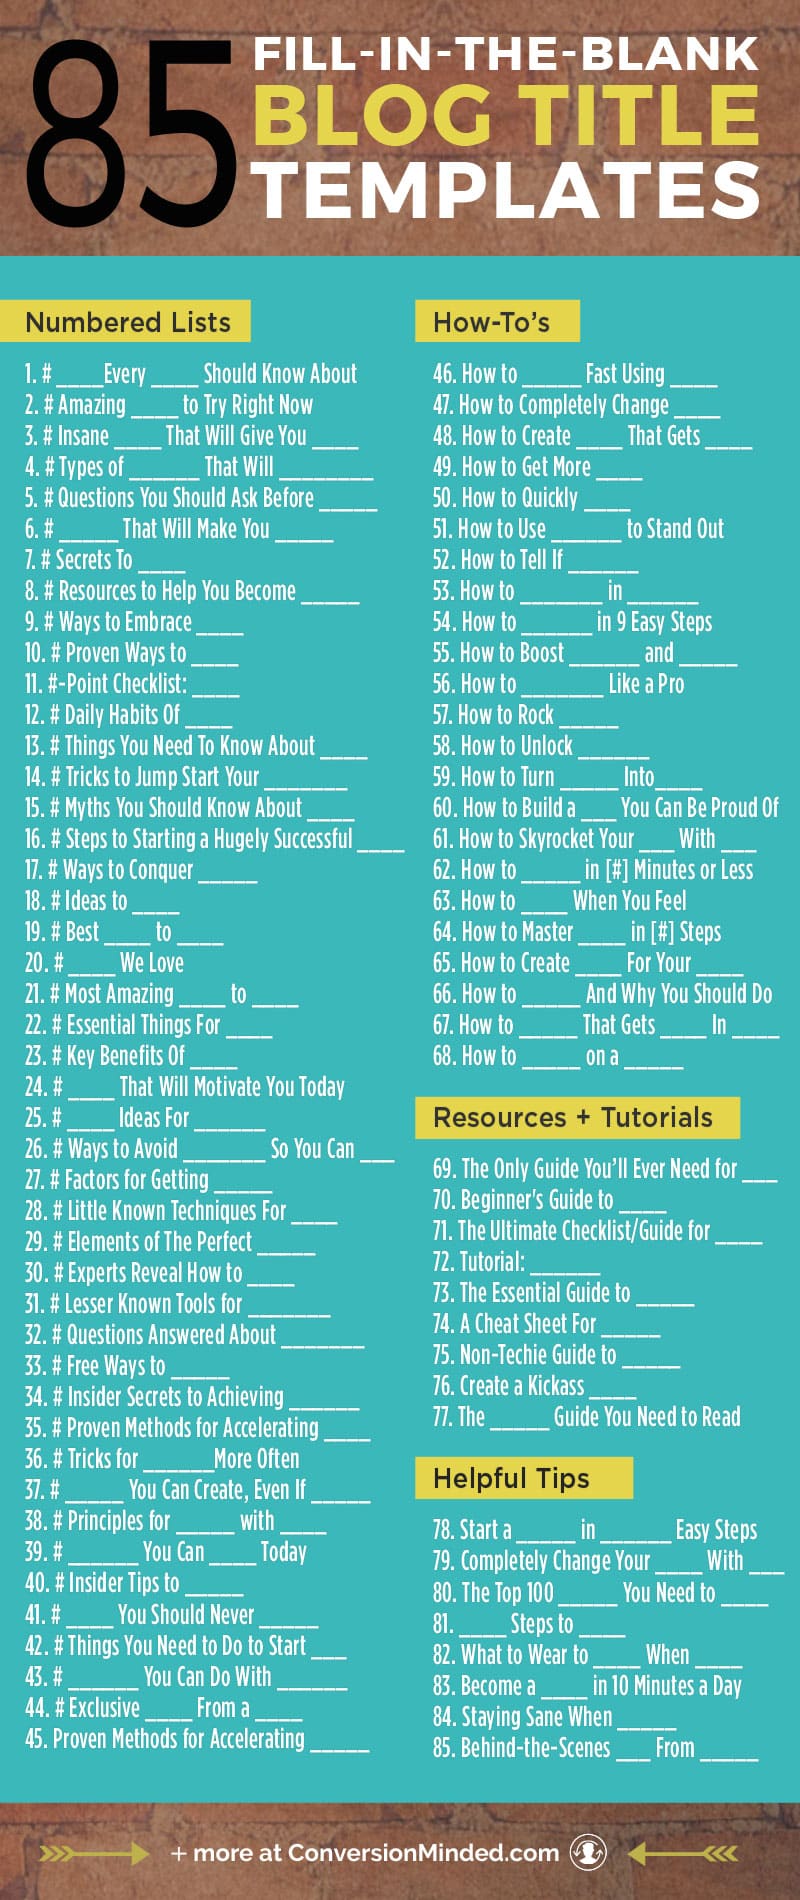 85 catchy title templates to use! All you have to do is choose your favorite blog post title template, fill in the blanks and get ready to convert like crazy. Check out Conversion Minded for even more!